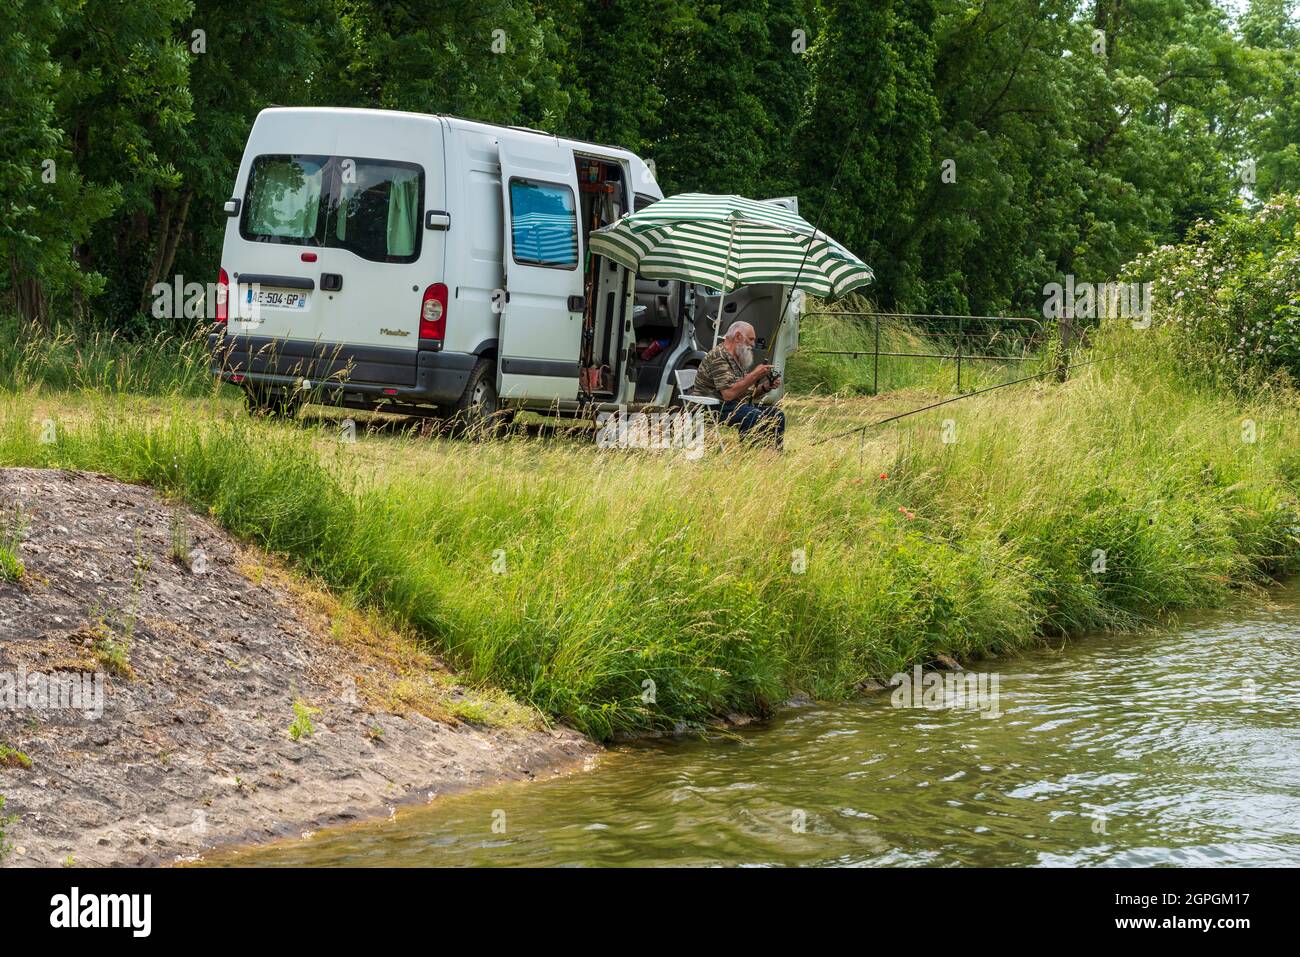 France, haute Saone, Scey sur Saone, motorhome Banque D'Images